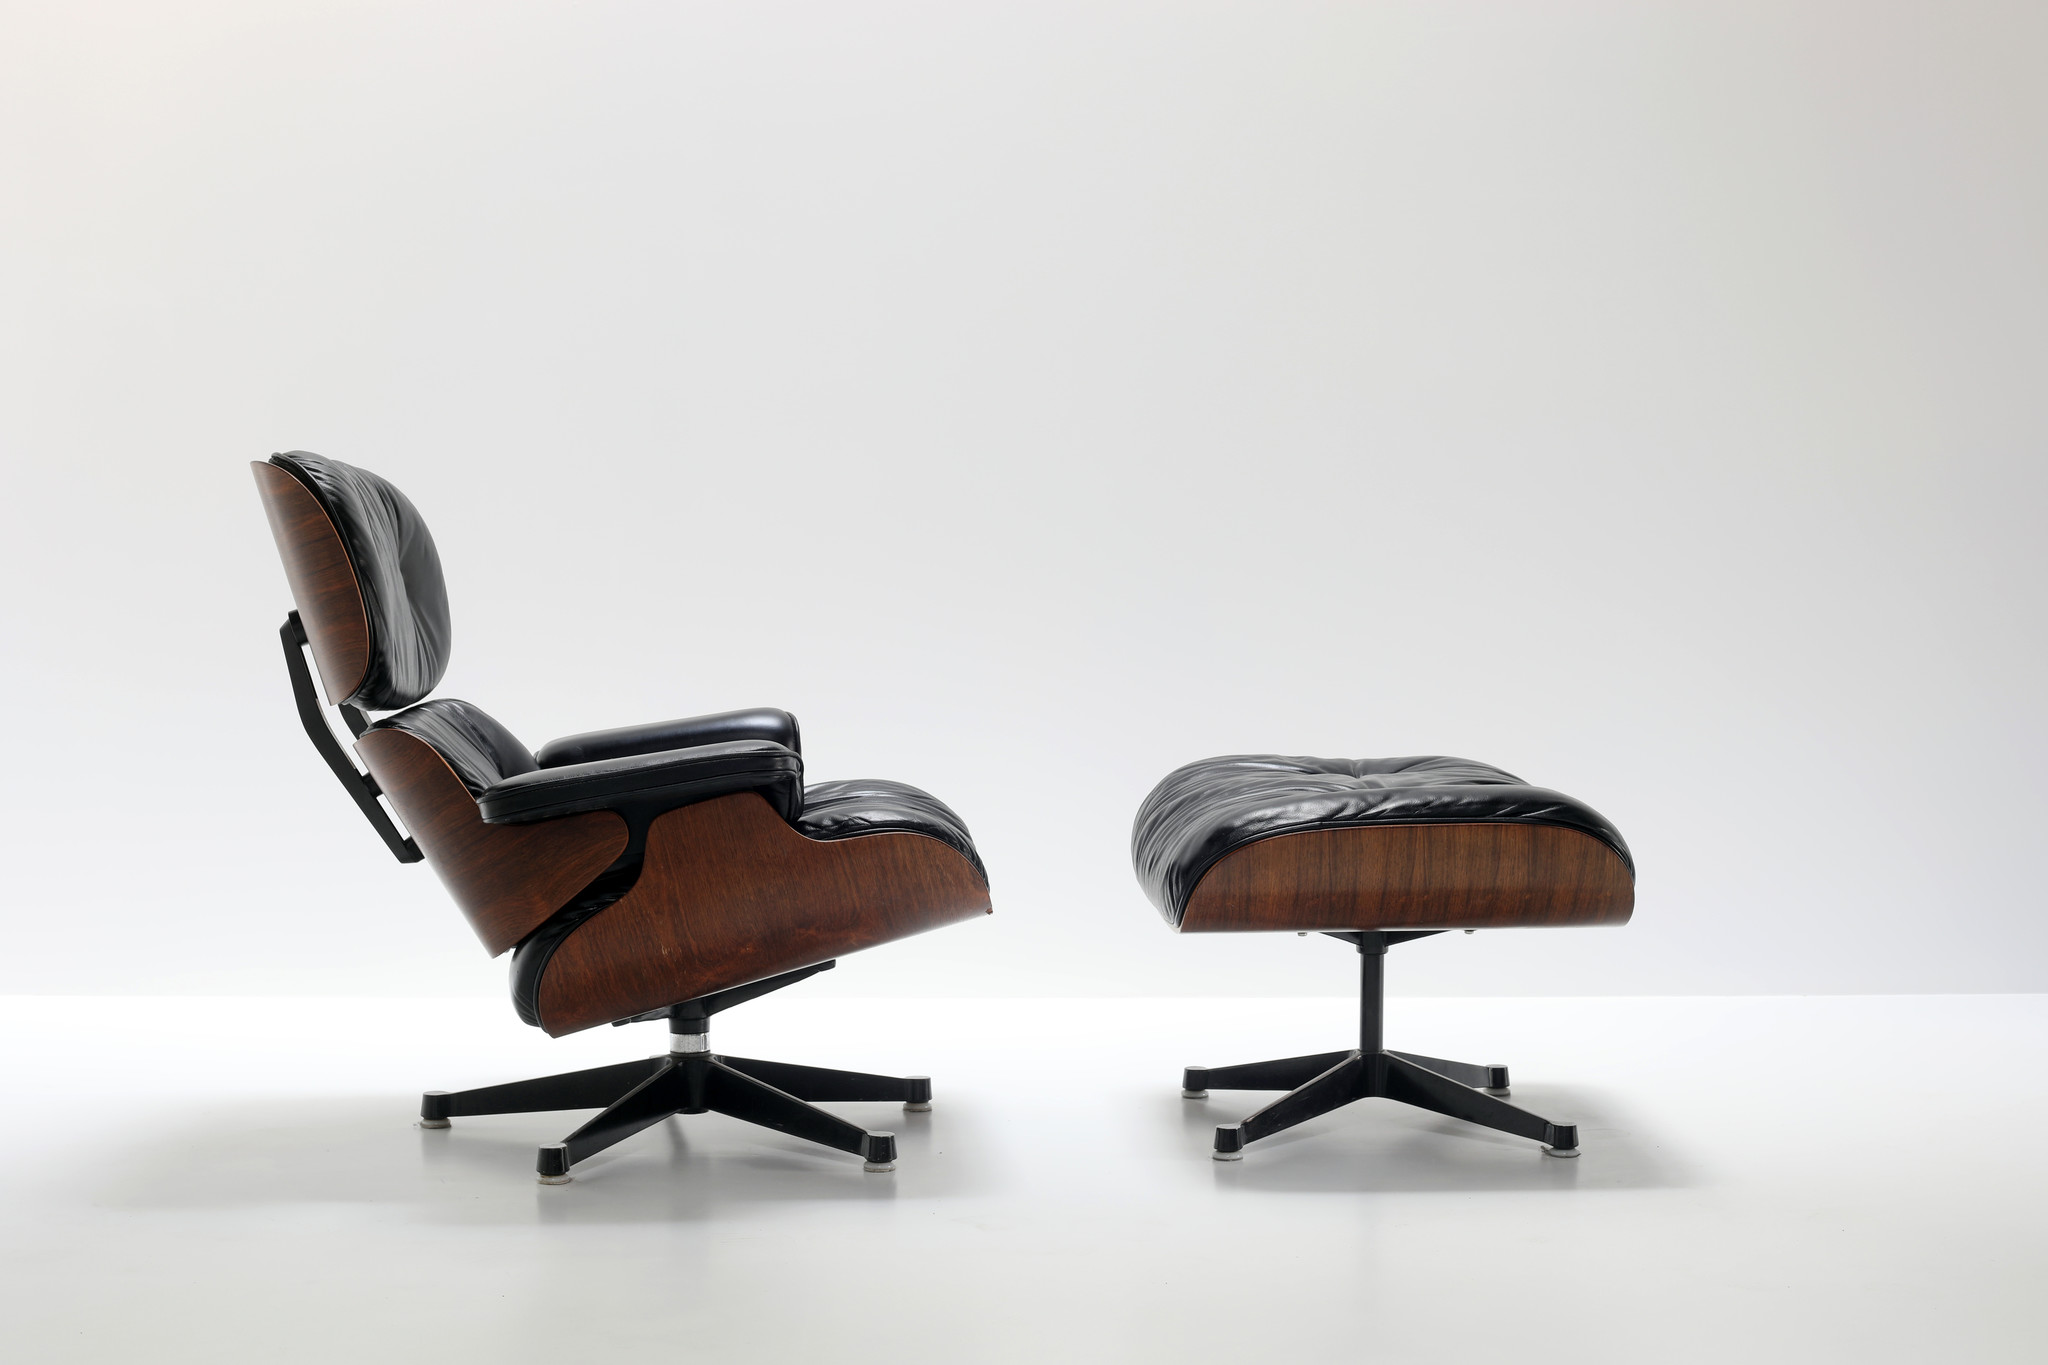 Charles Eames Lounge Chair in rosewood finish